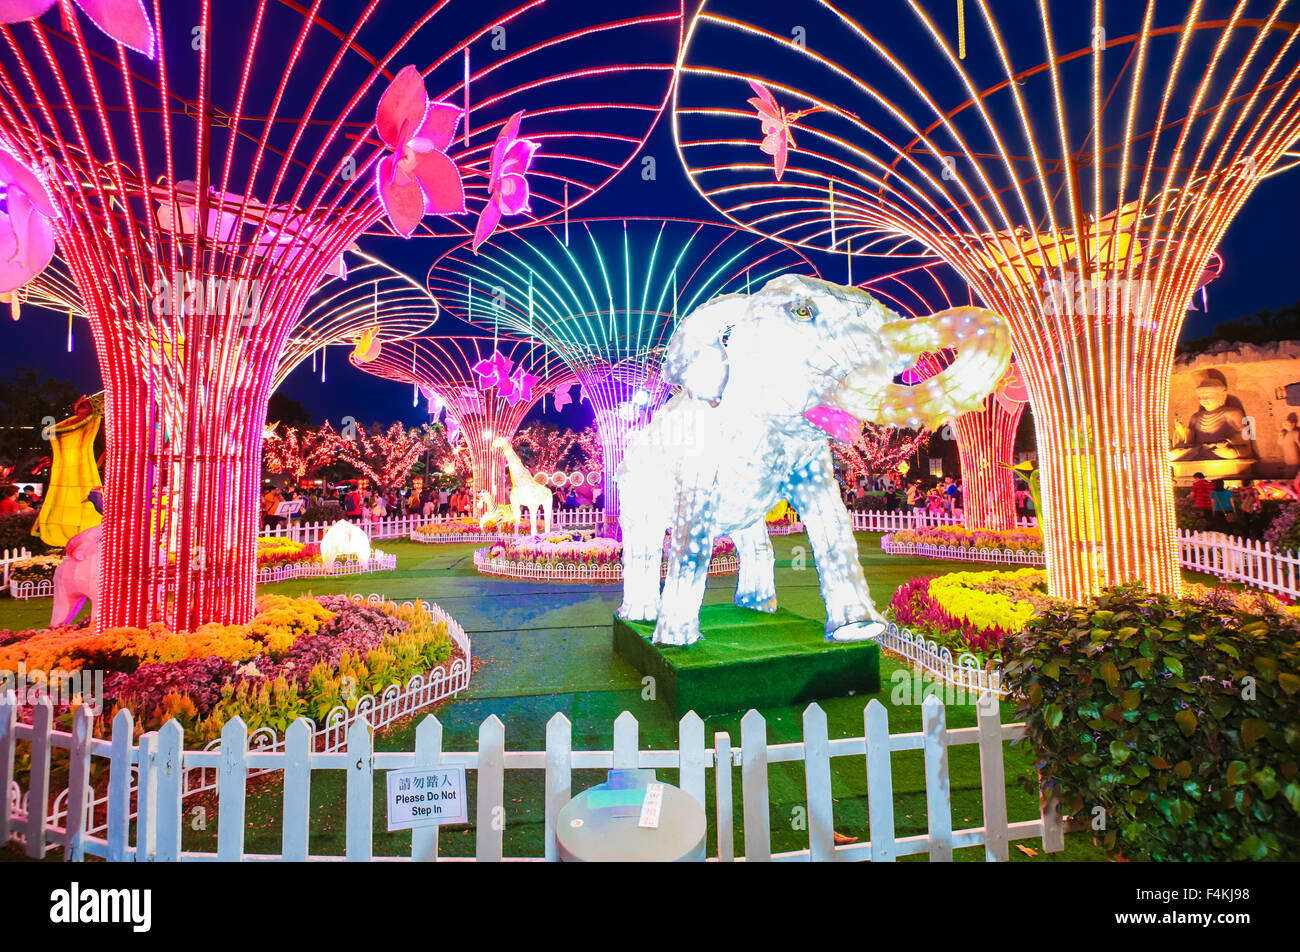 LED metal tree and elephant decorations at FGS garden temple, Jenjarom Malaysia during chinese new year 2014. Stock Photo